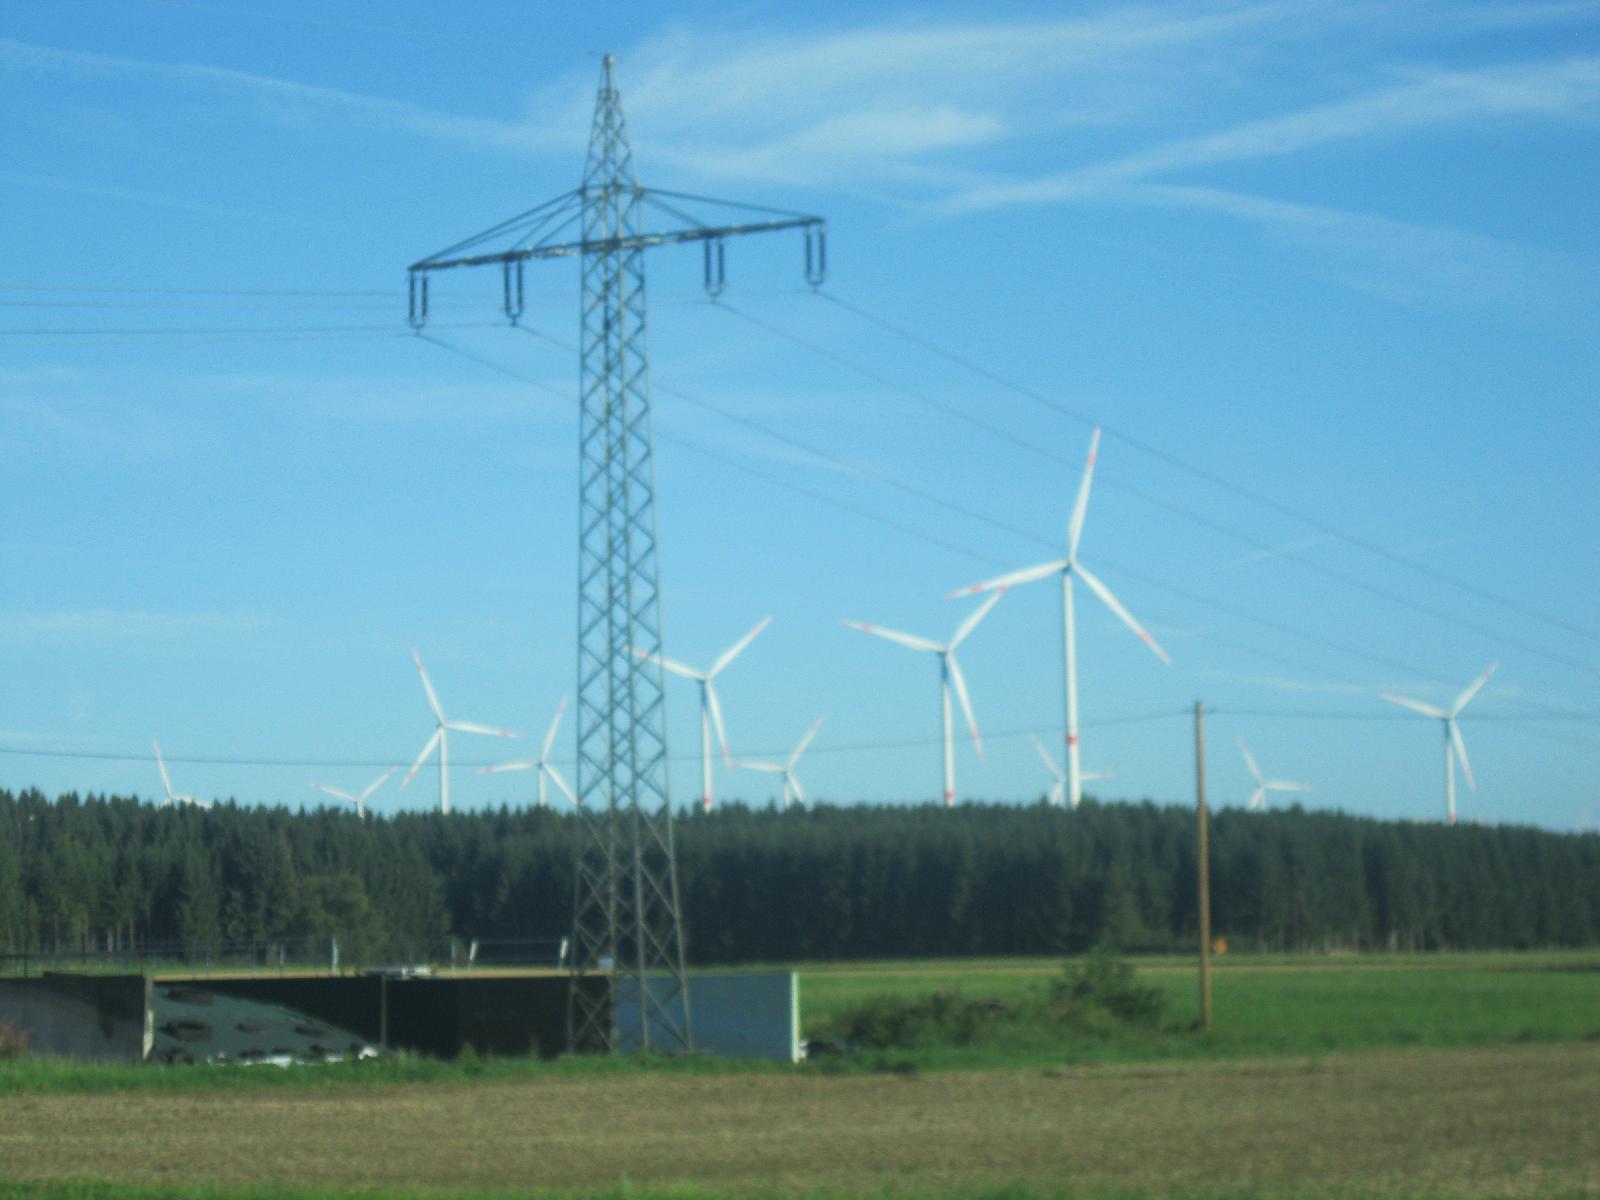 Group of Windmills